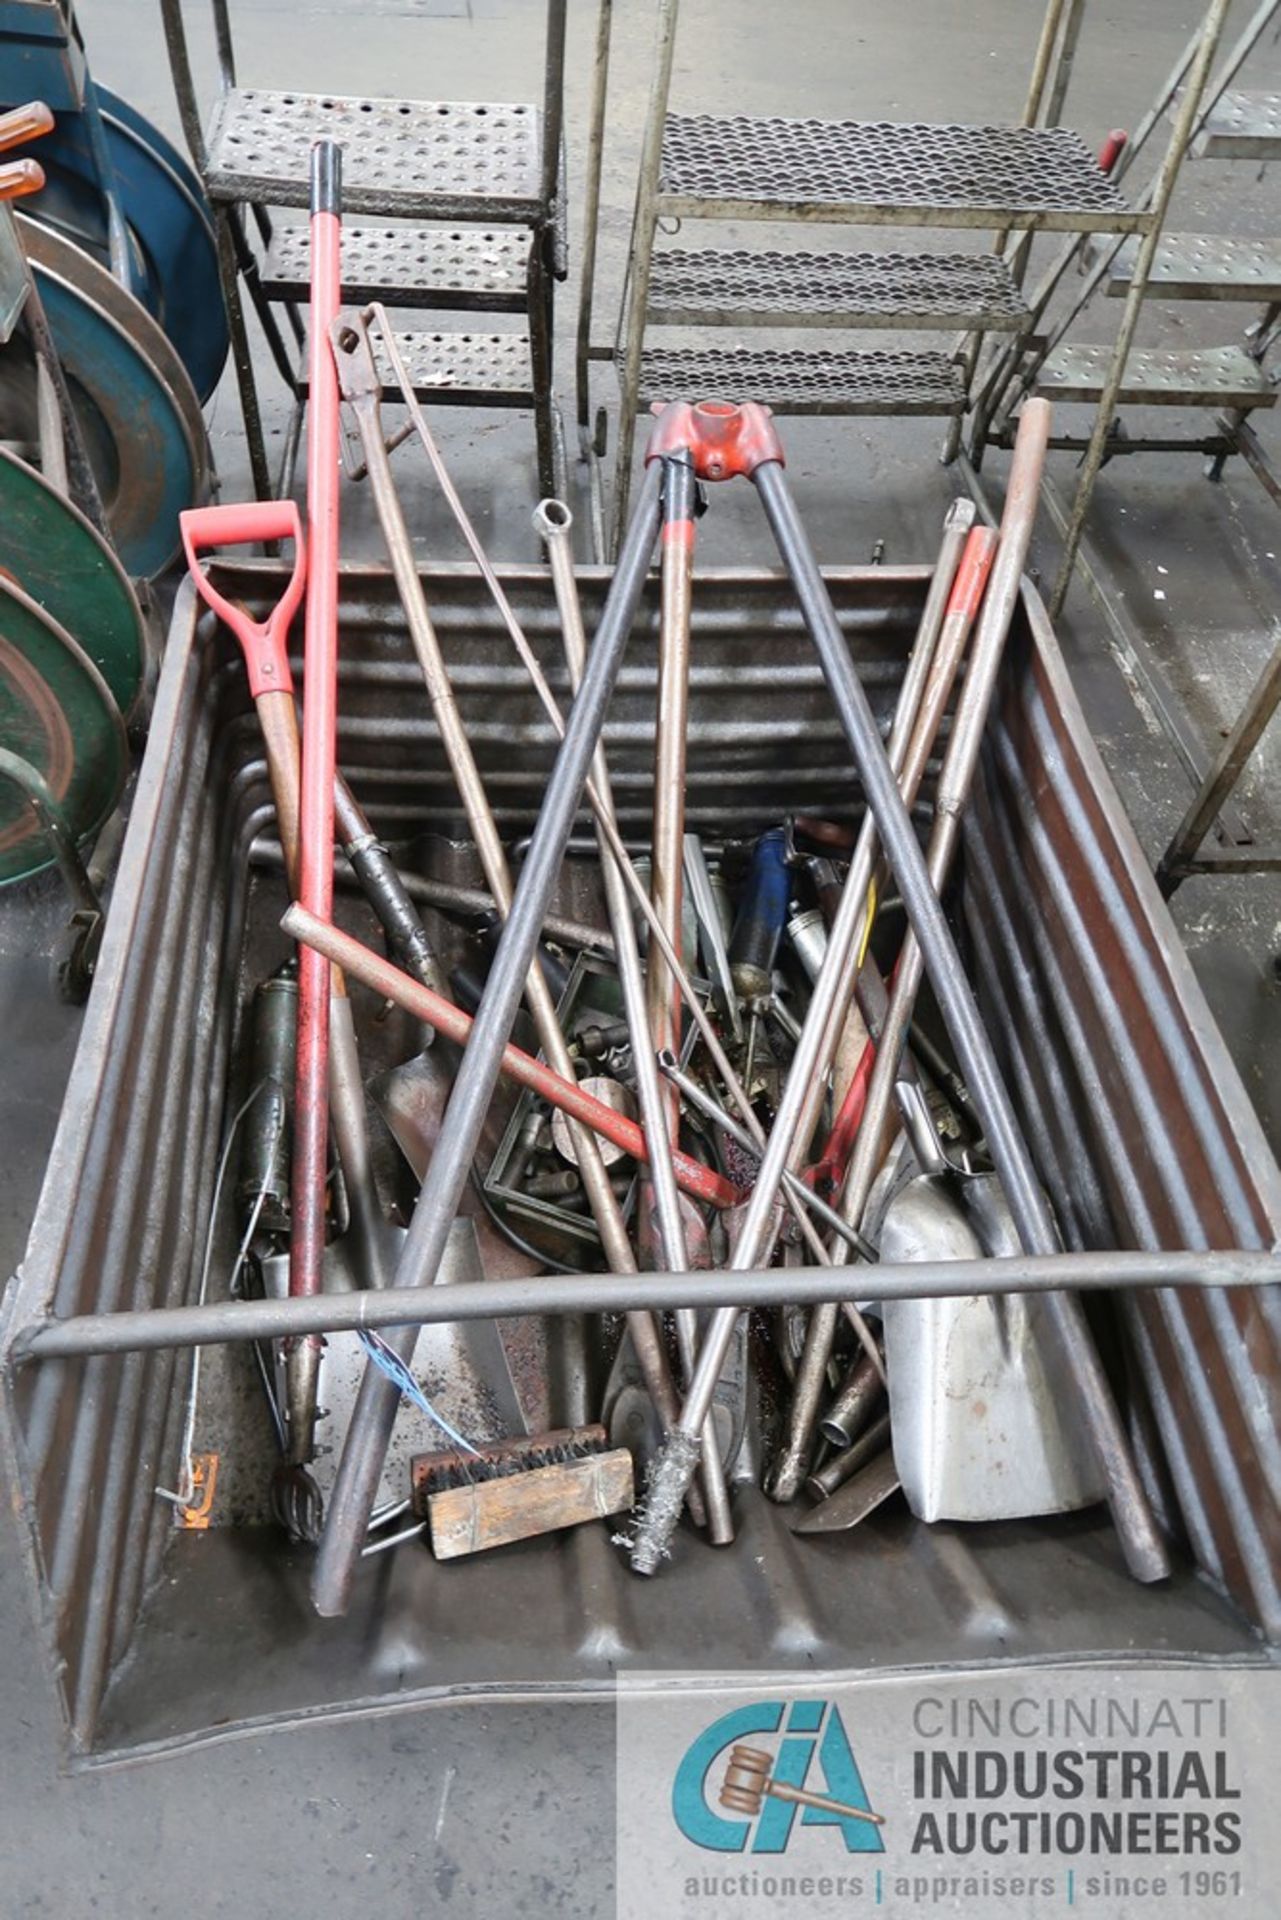 (LOT) LONG HANDLED TOOLS WITH STEEL TUB - Image 2 of 2